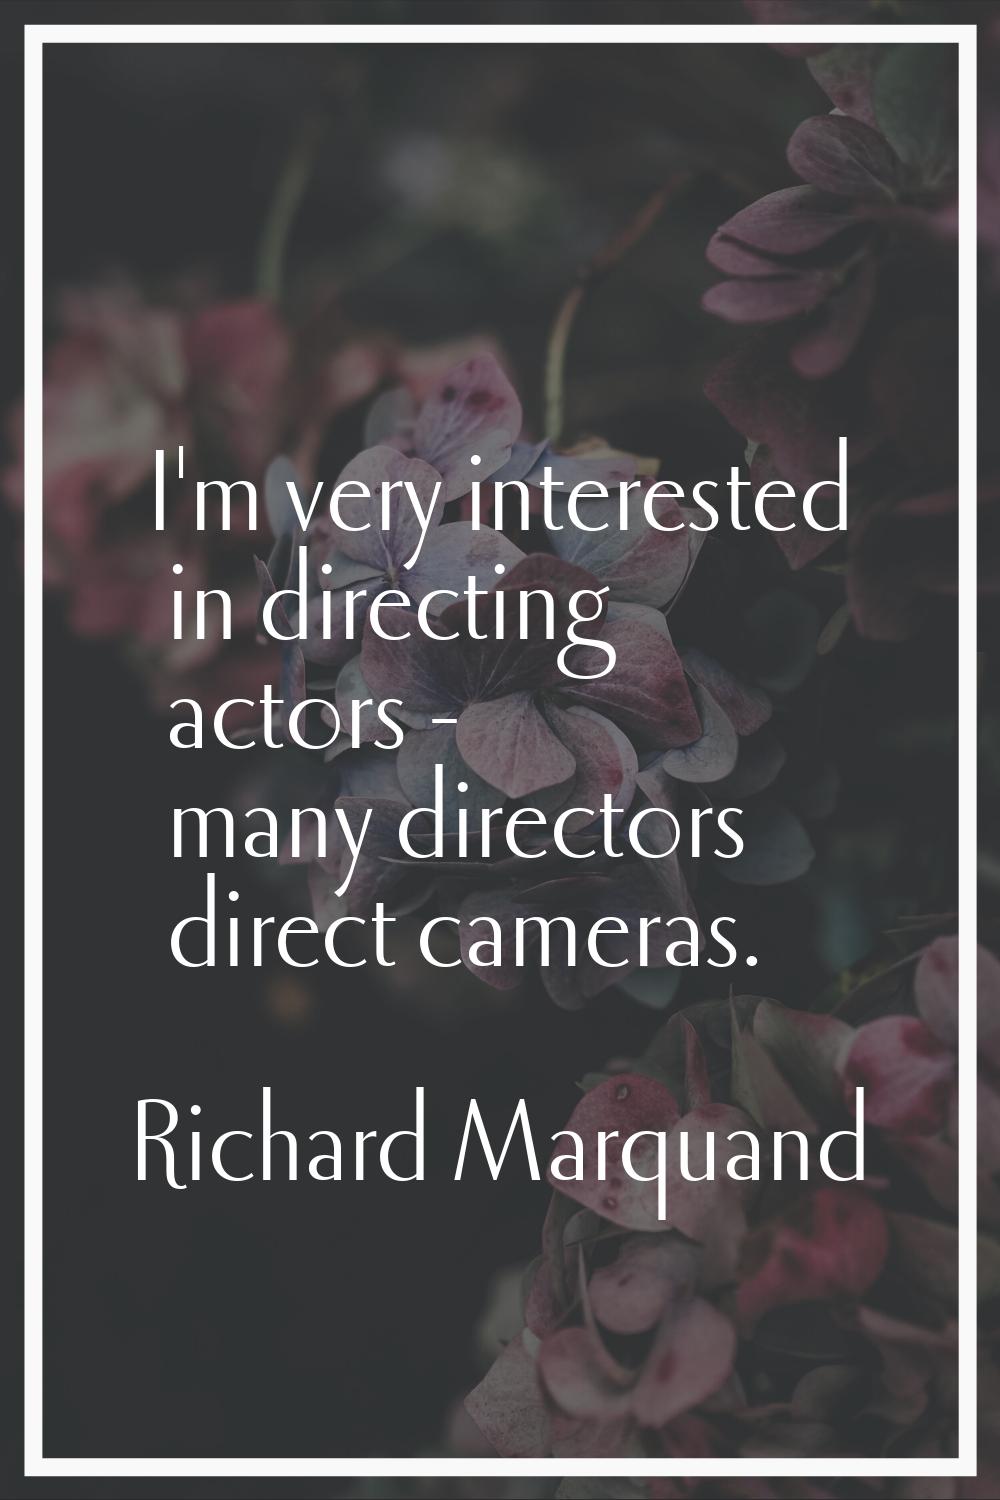 I'm very interested in directing actors - many directors direct cameras.